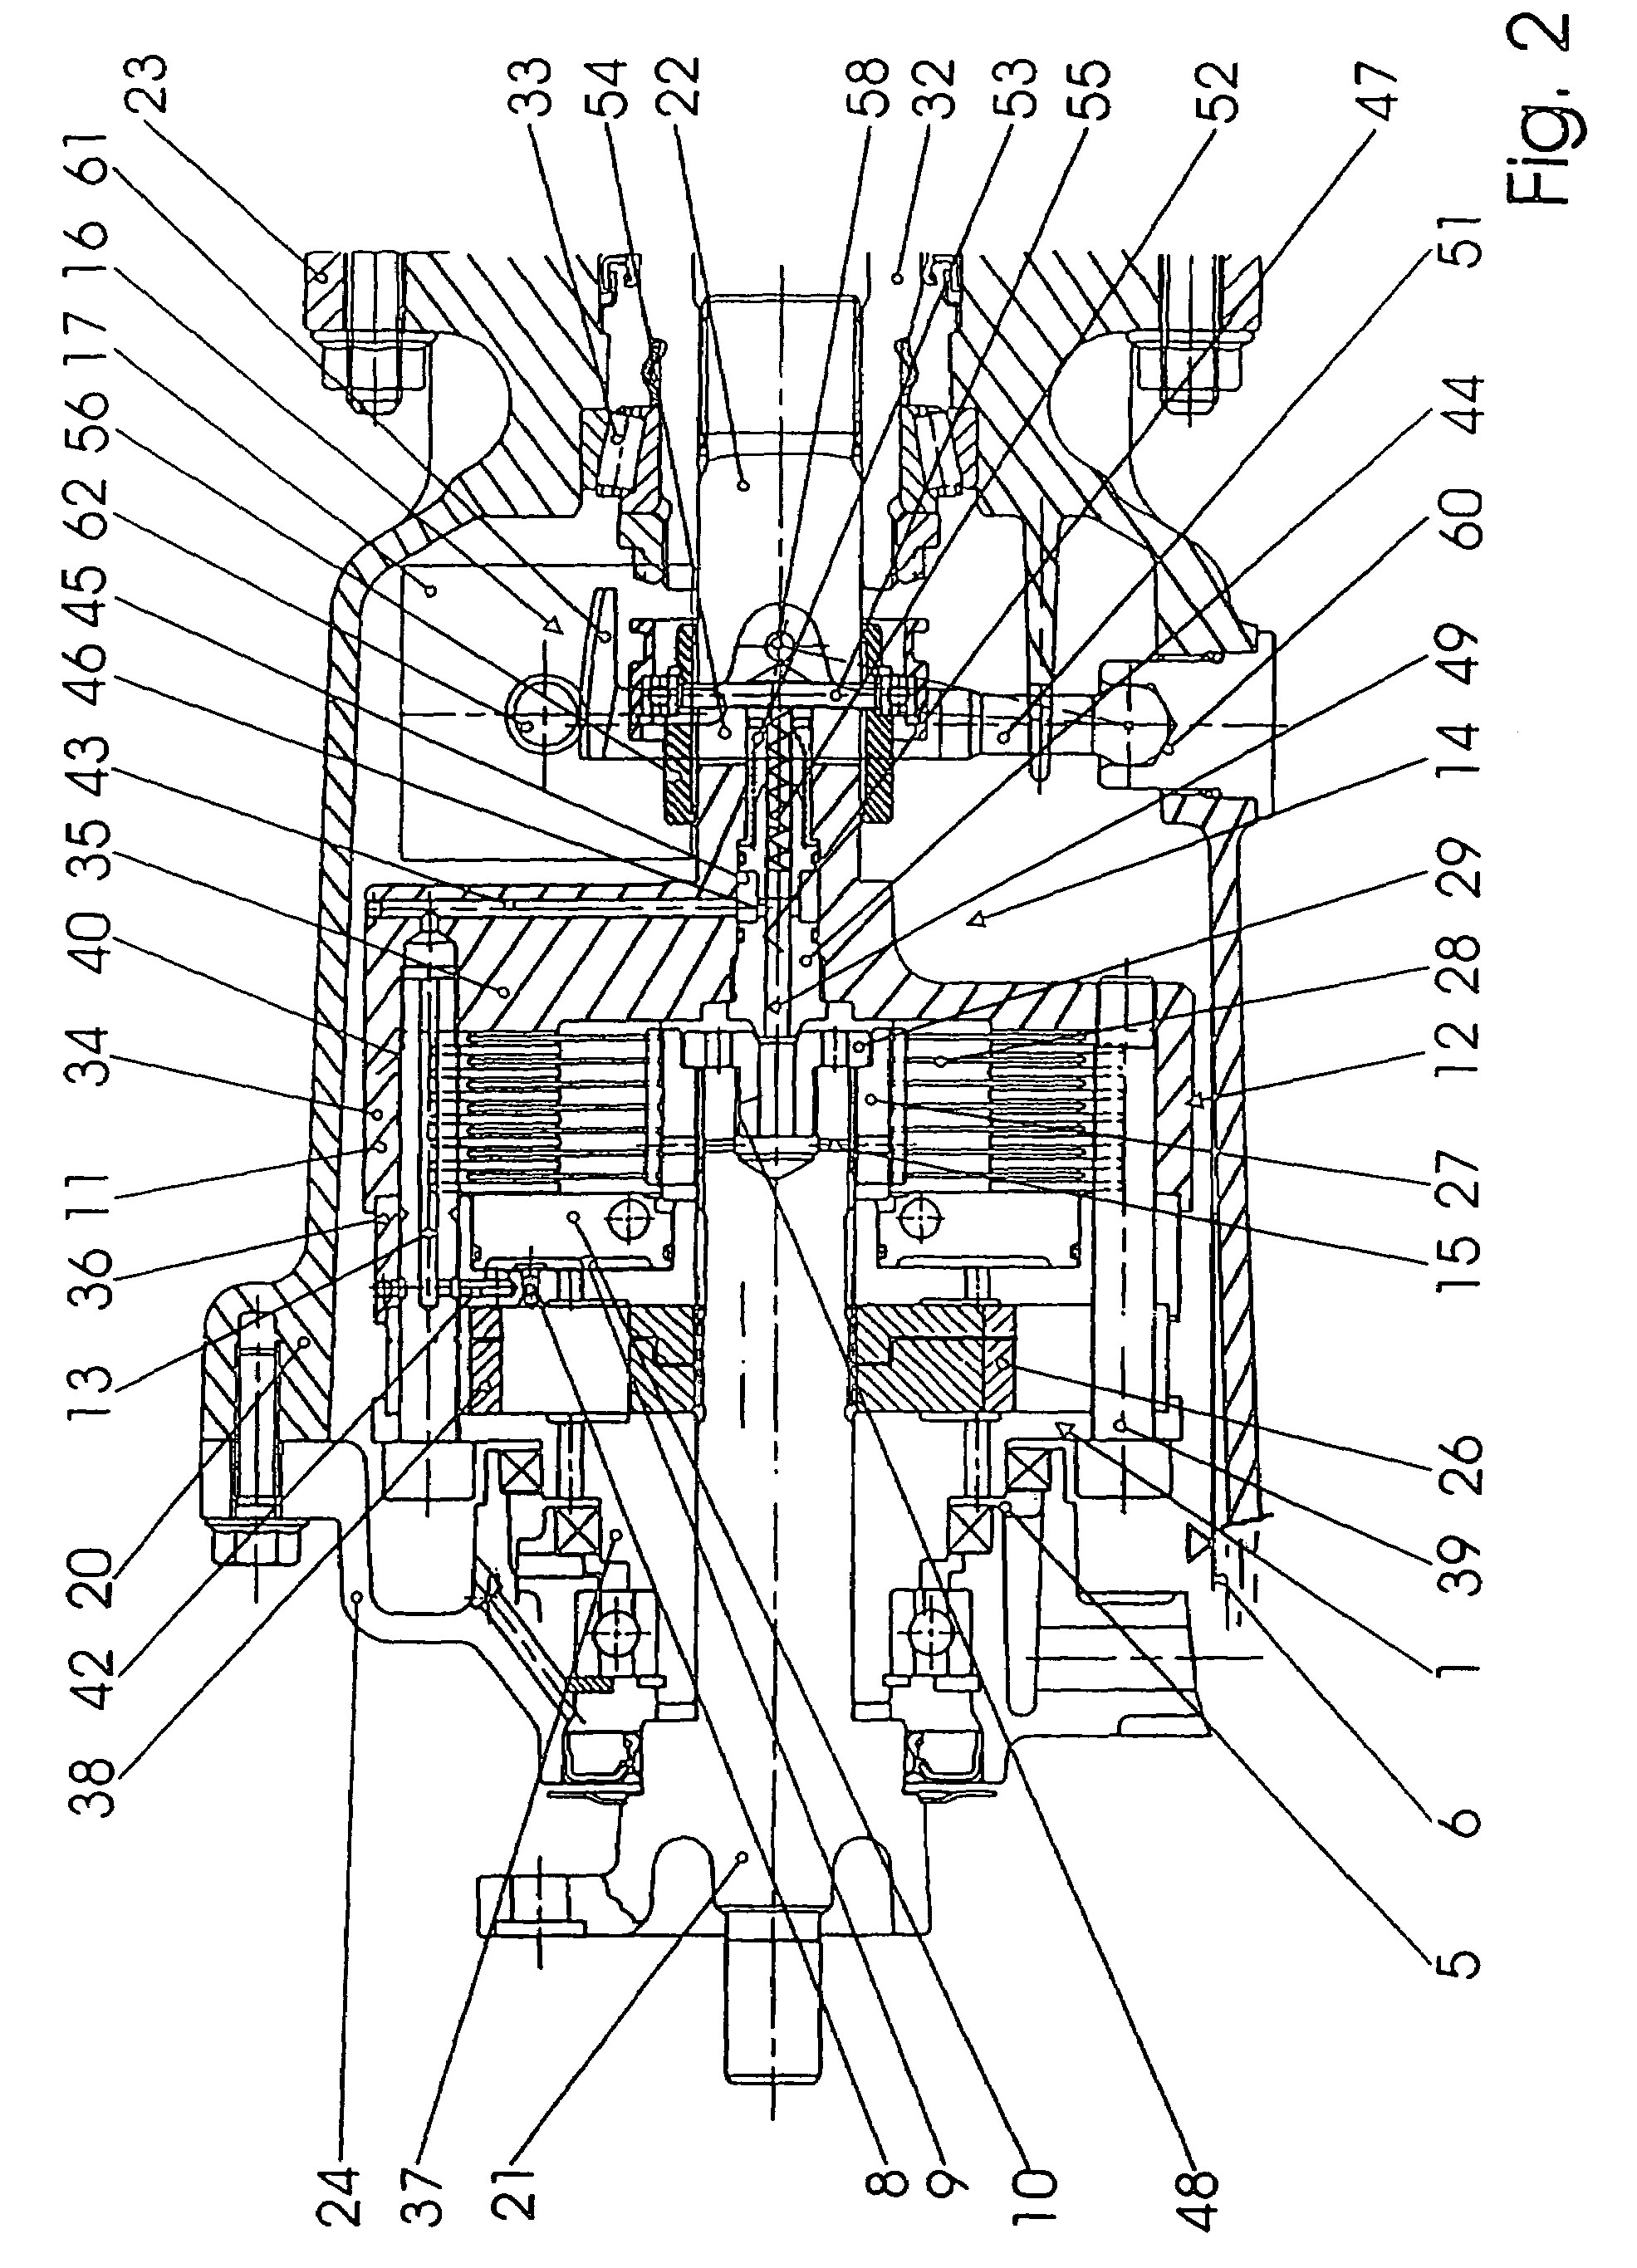 Speed differential-dependent hydraulic clutch with a control valve